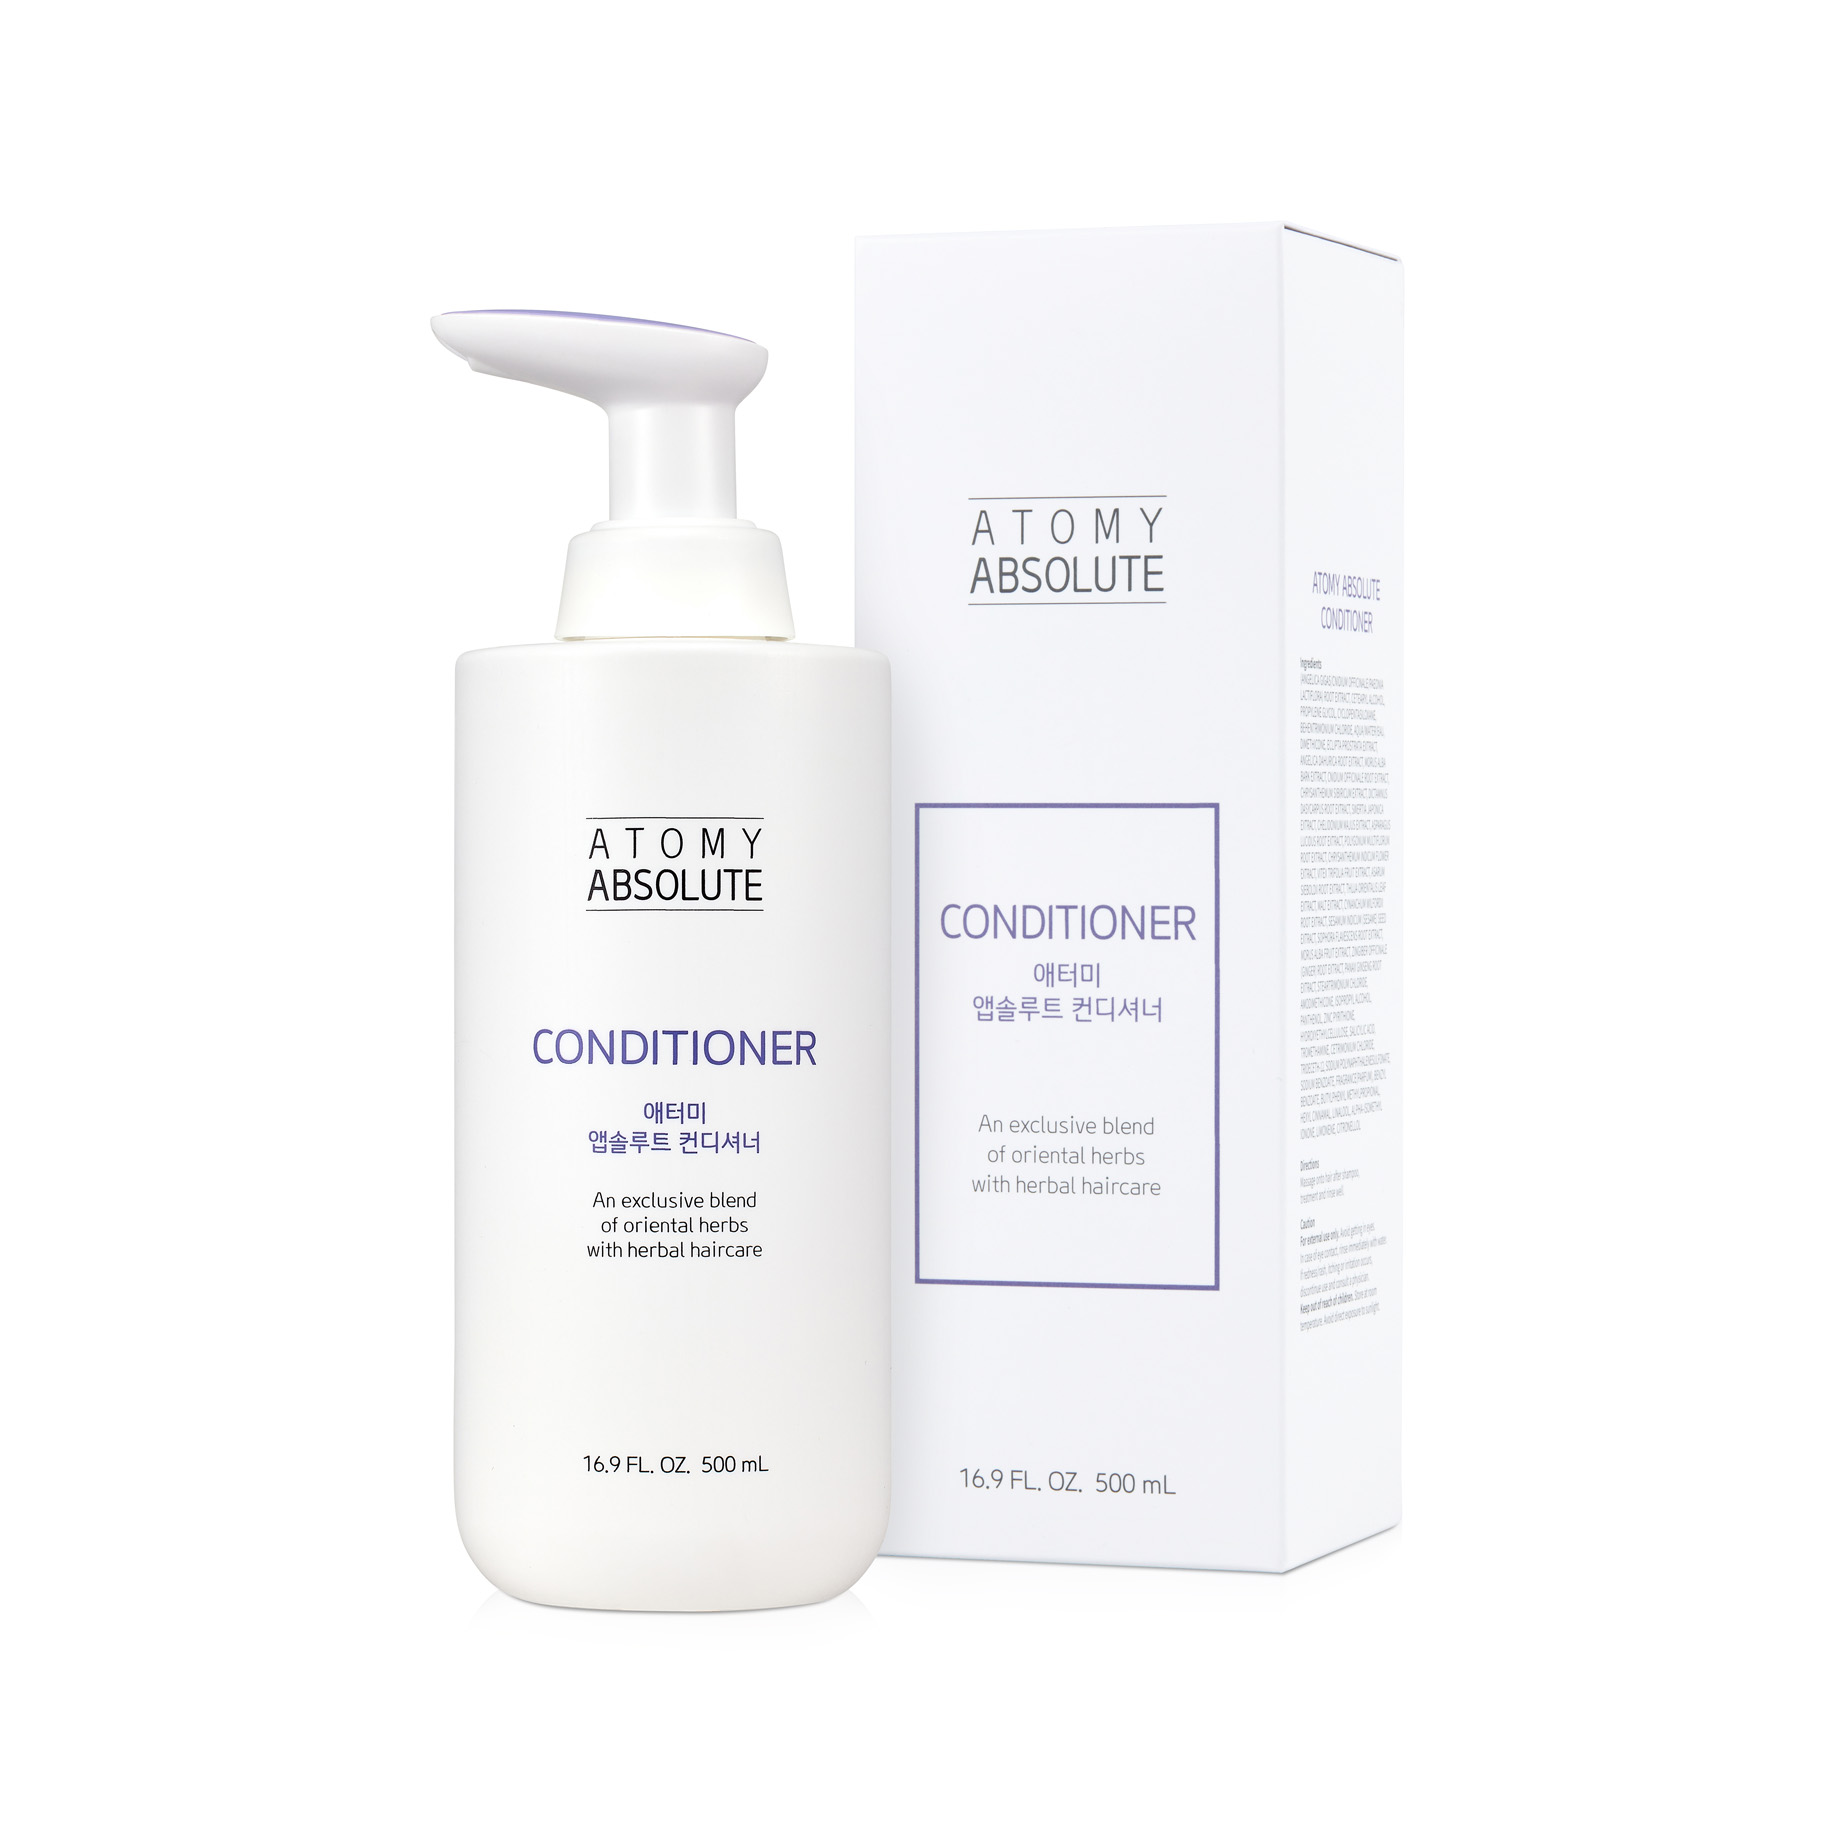 Atomy Absolute Conditioner